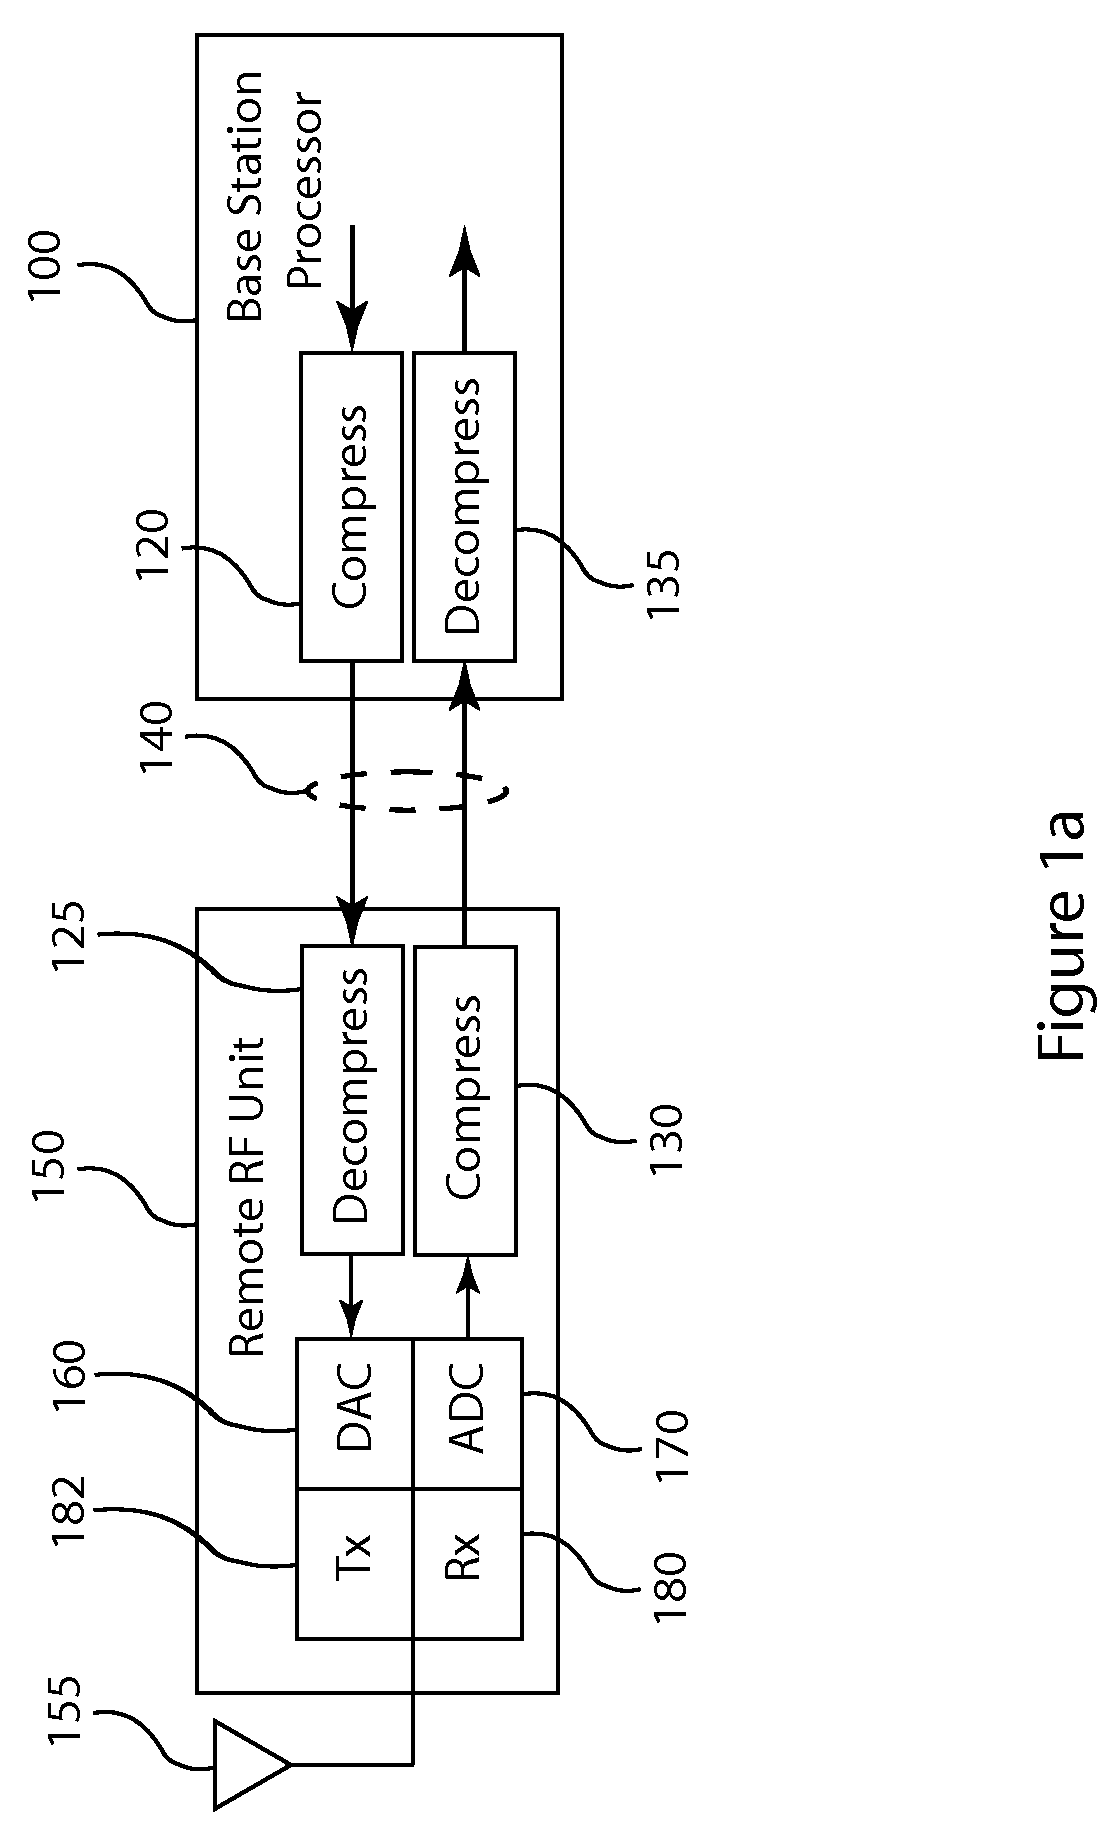 Frequency domain compression in a base transceiver system